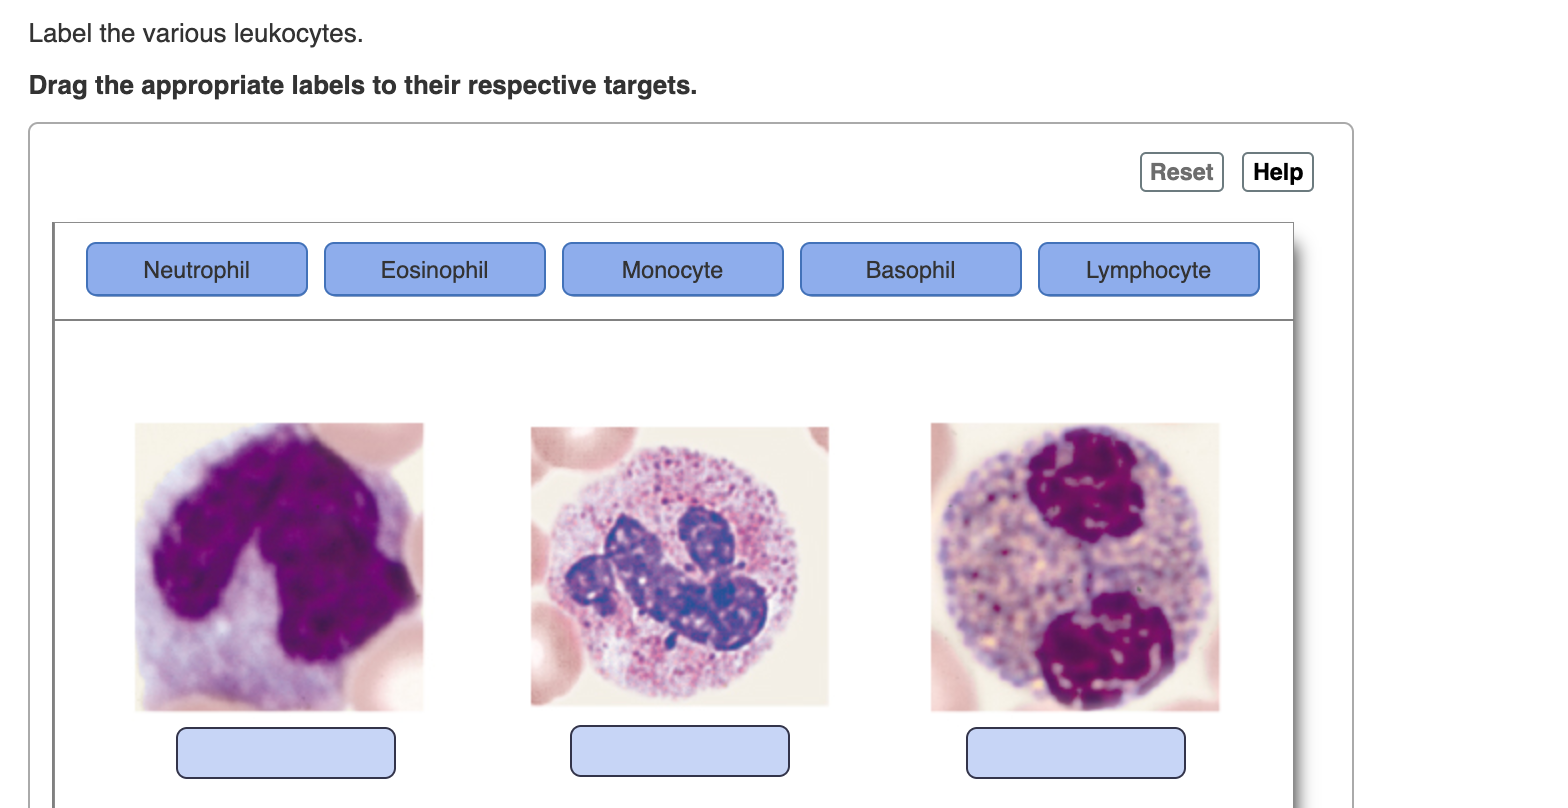 Label the various leukocytes.
Drag the appropriate labels to their respective targets.
